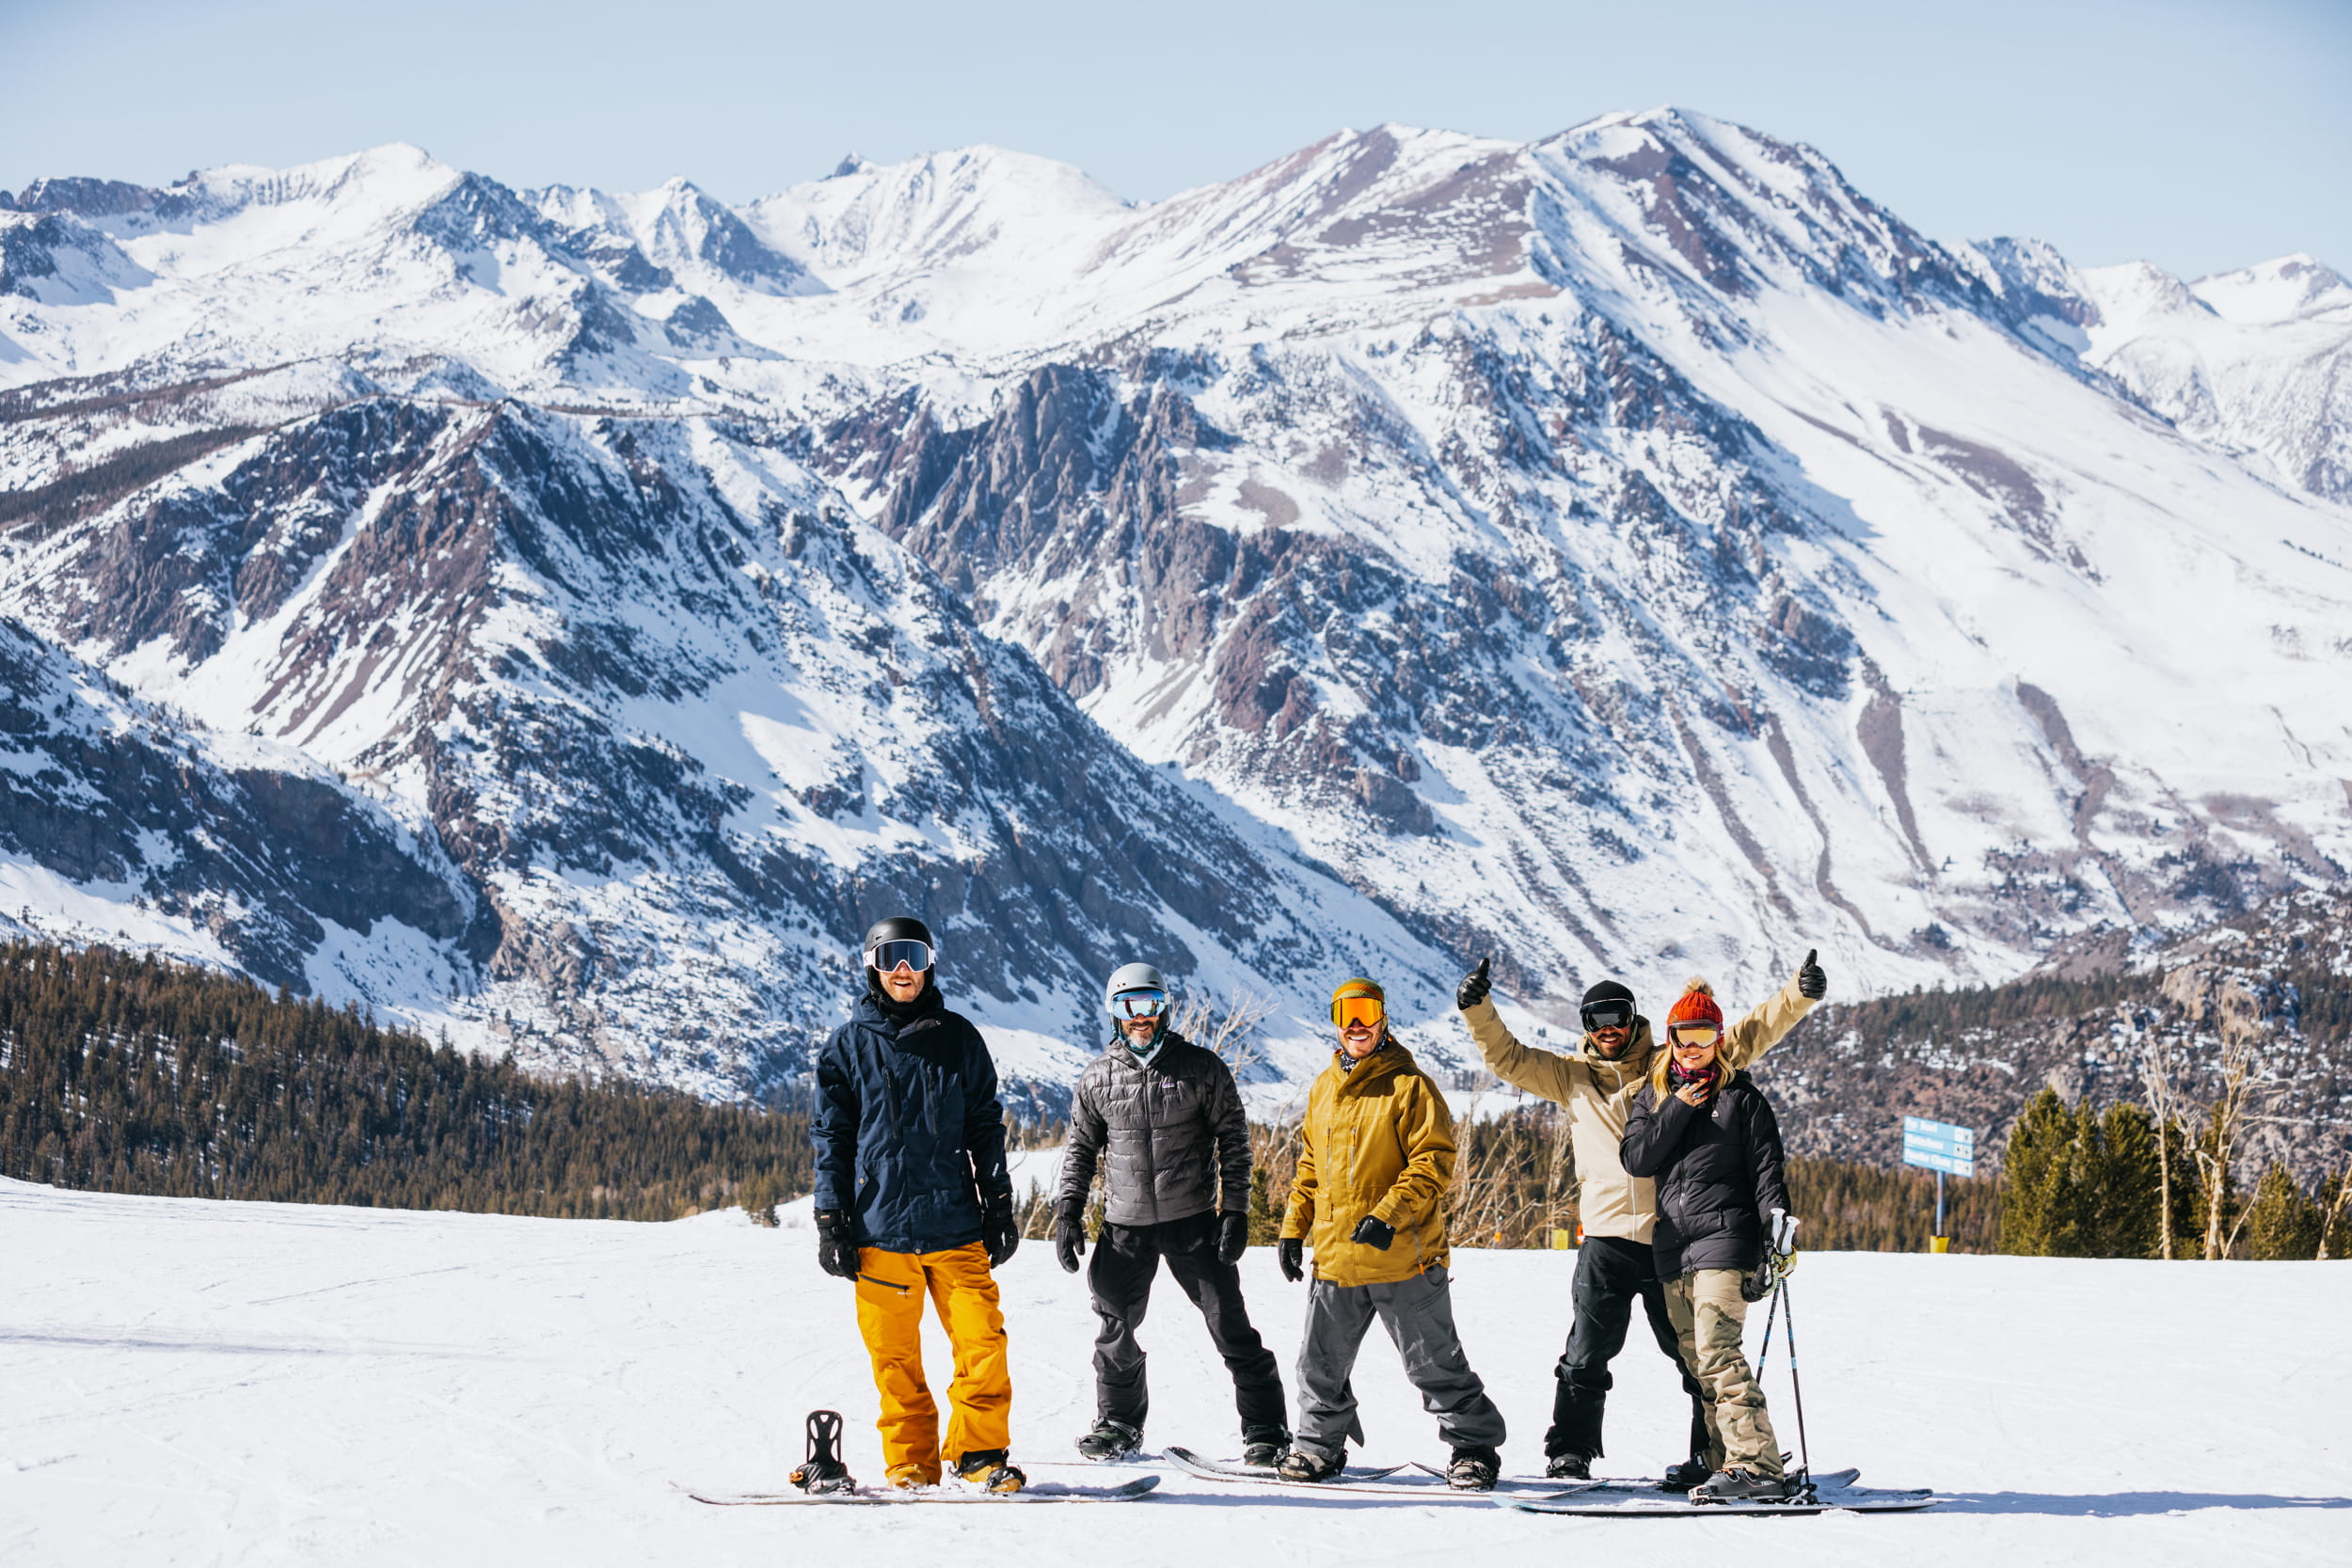 Group of snowboarders out in the mountains